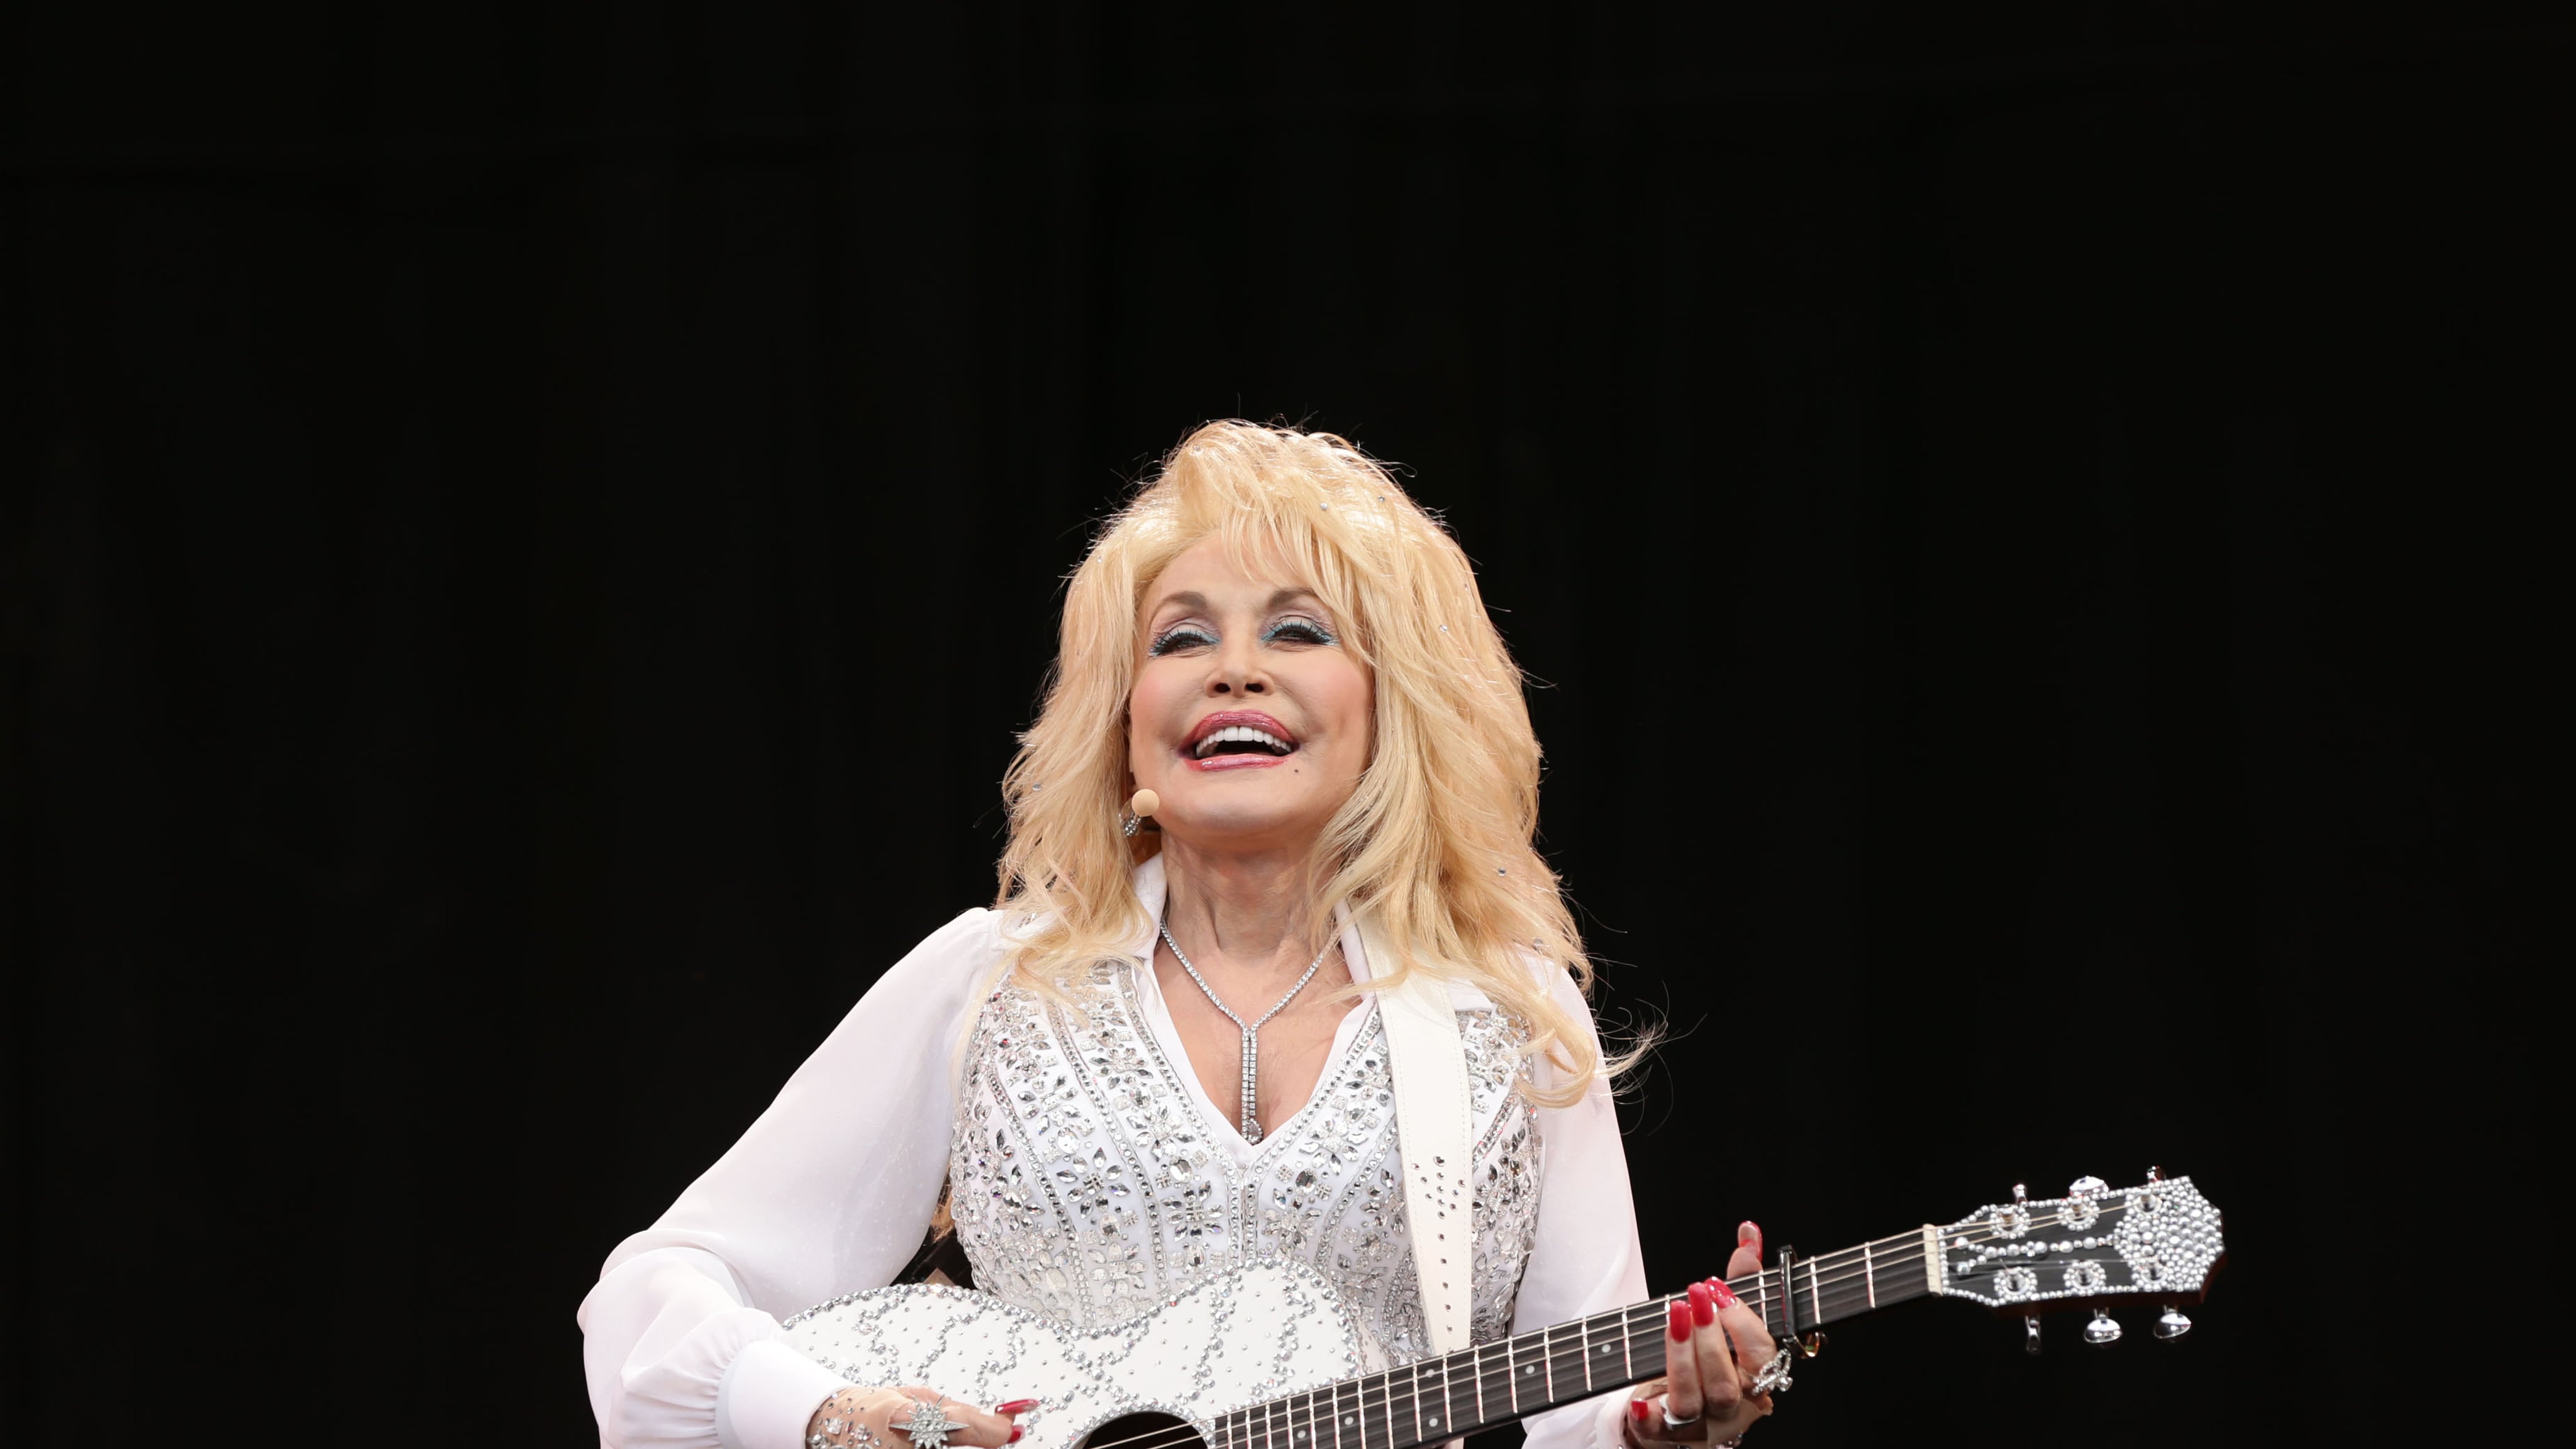 Dolly Parton has been sent a Wrexham AFC scarf by the football club’s owners Ryan Reynolds and Rob McElhenney